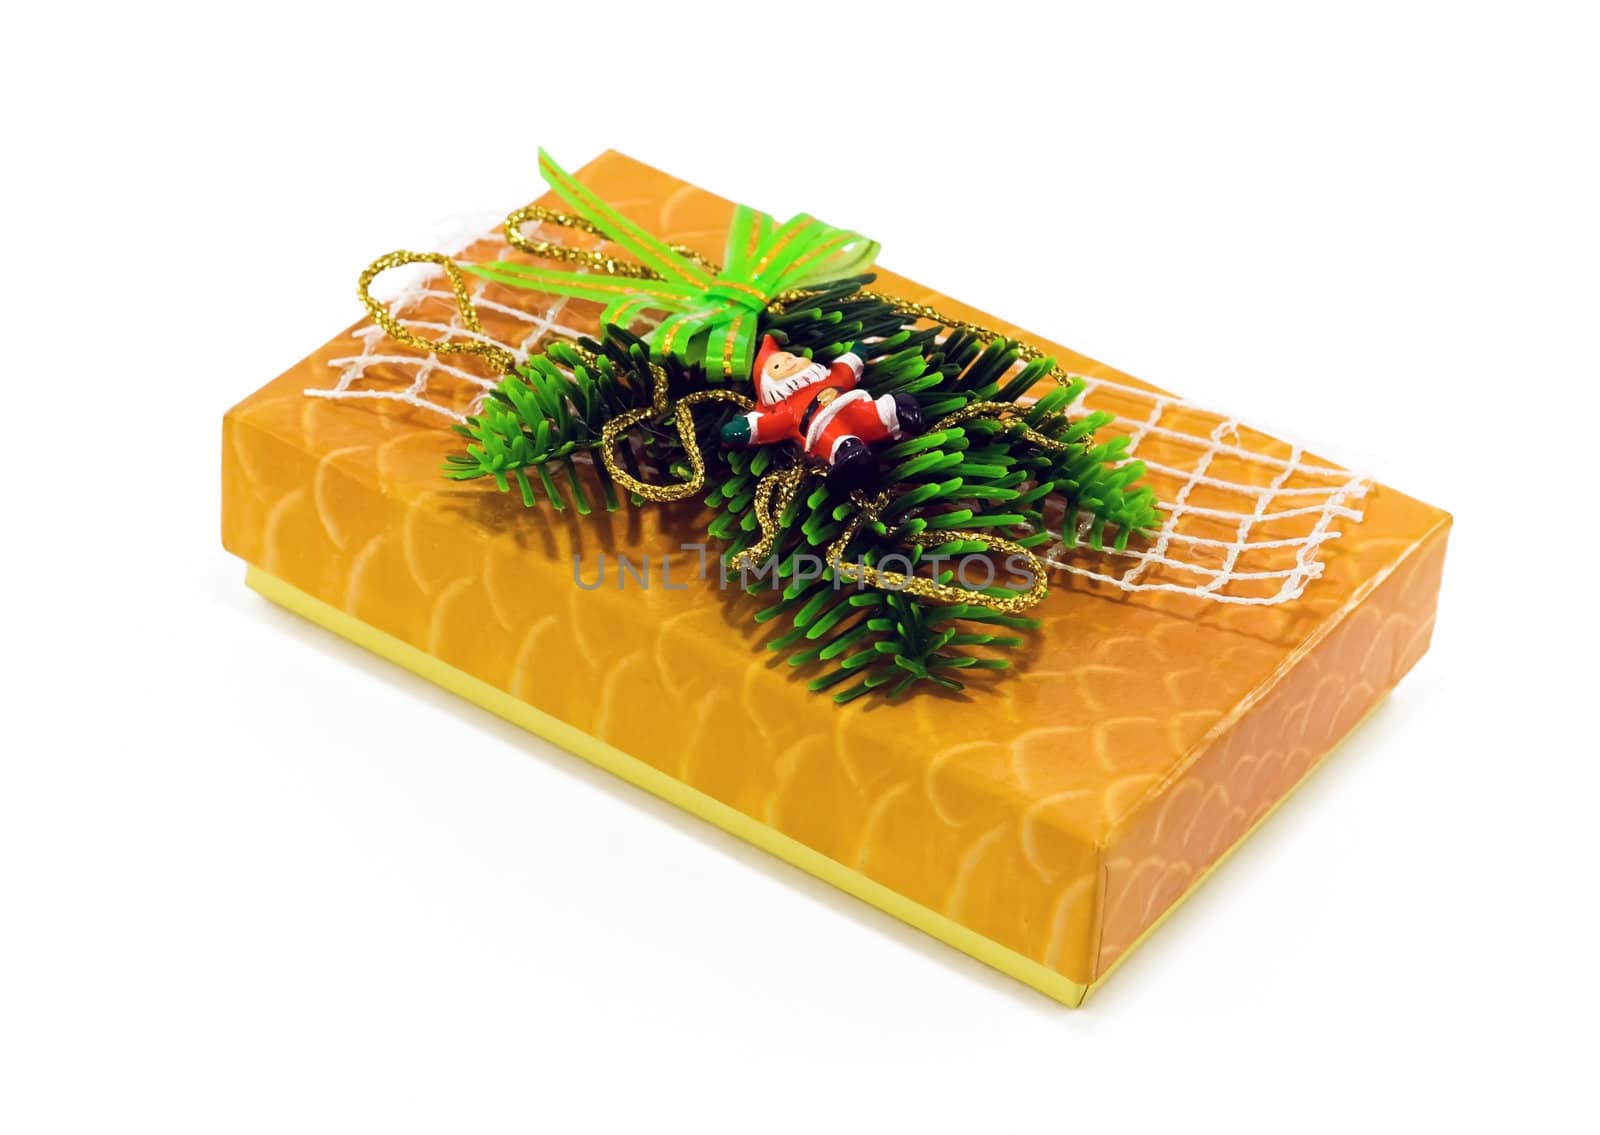 A yellow box decorated with pine, ribbons and Santa 